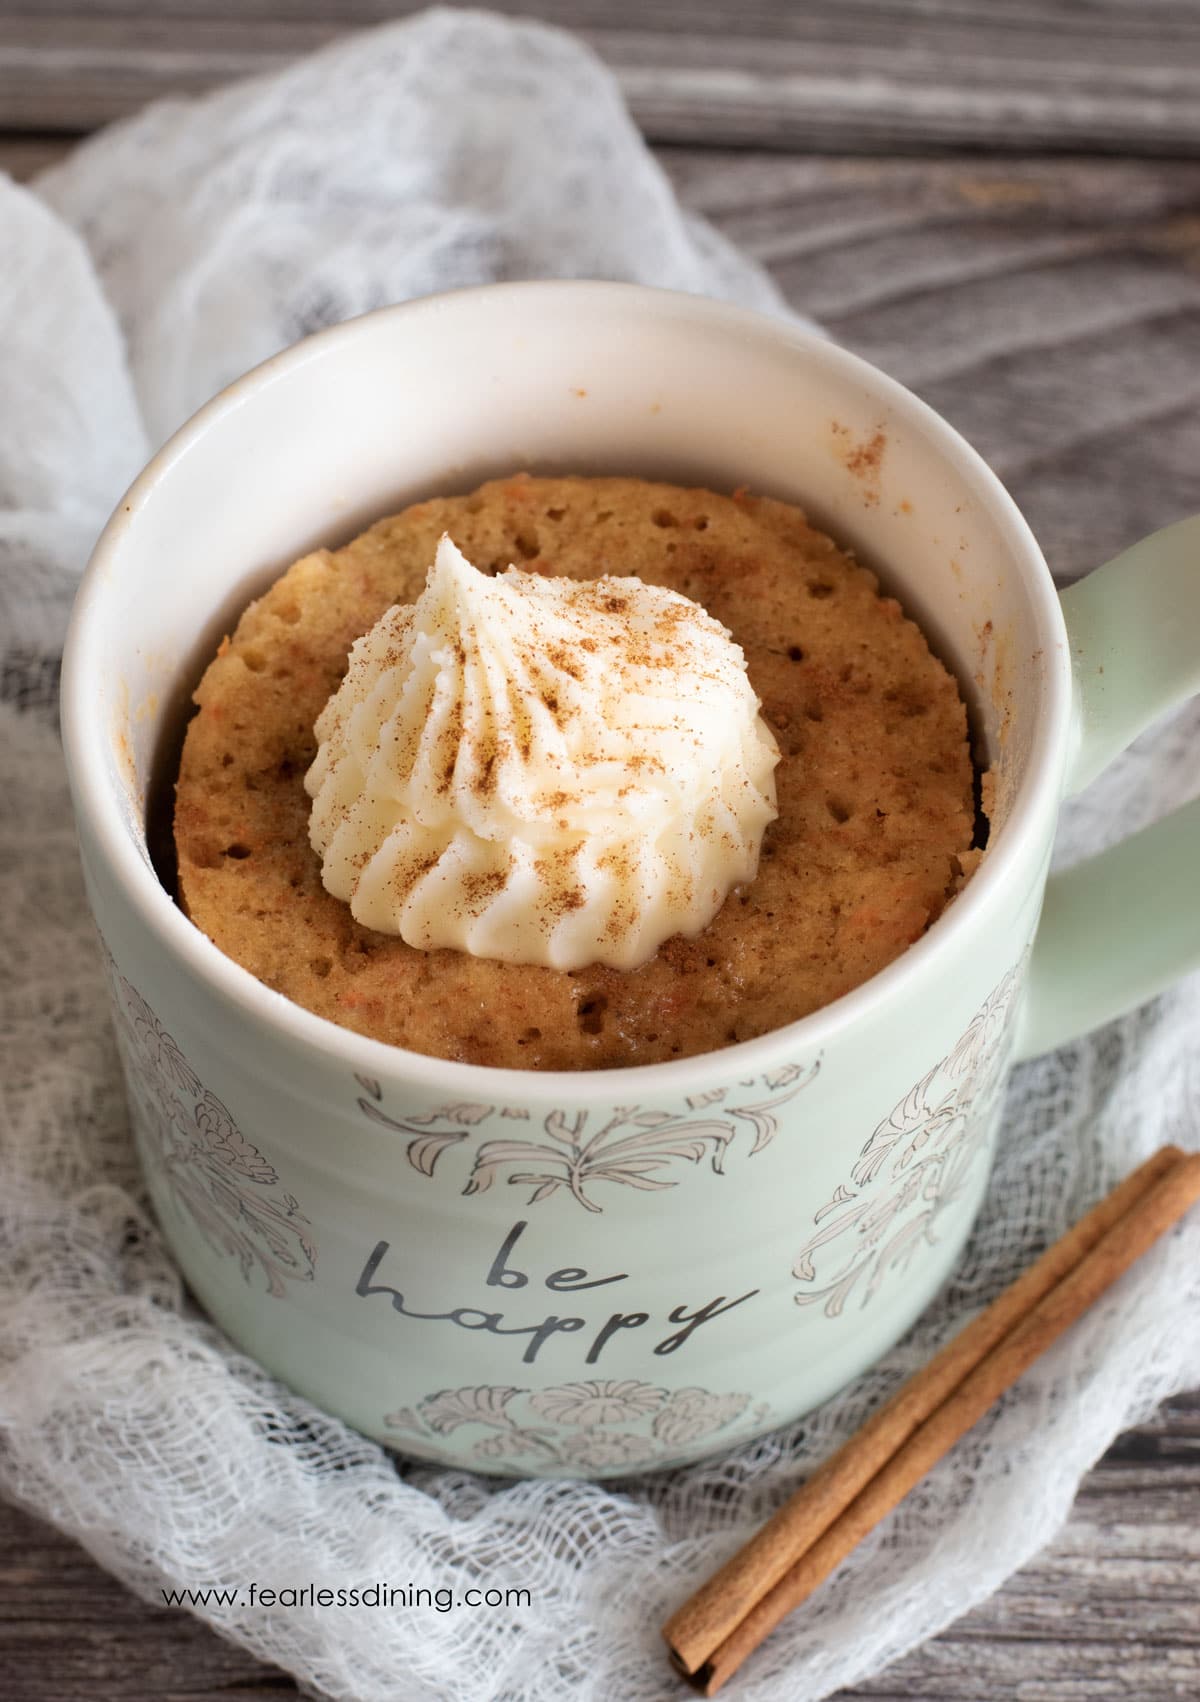 A cooked carrot cake in a mug with a dollop of frosting.